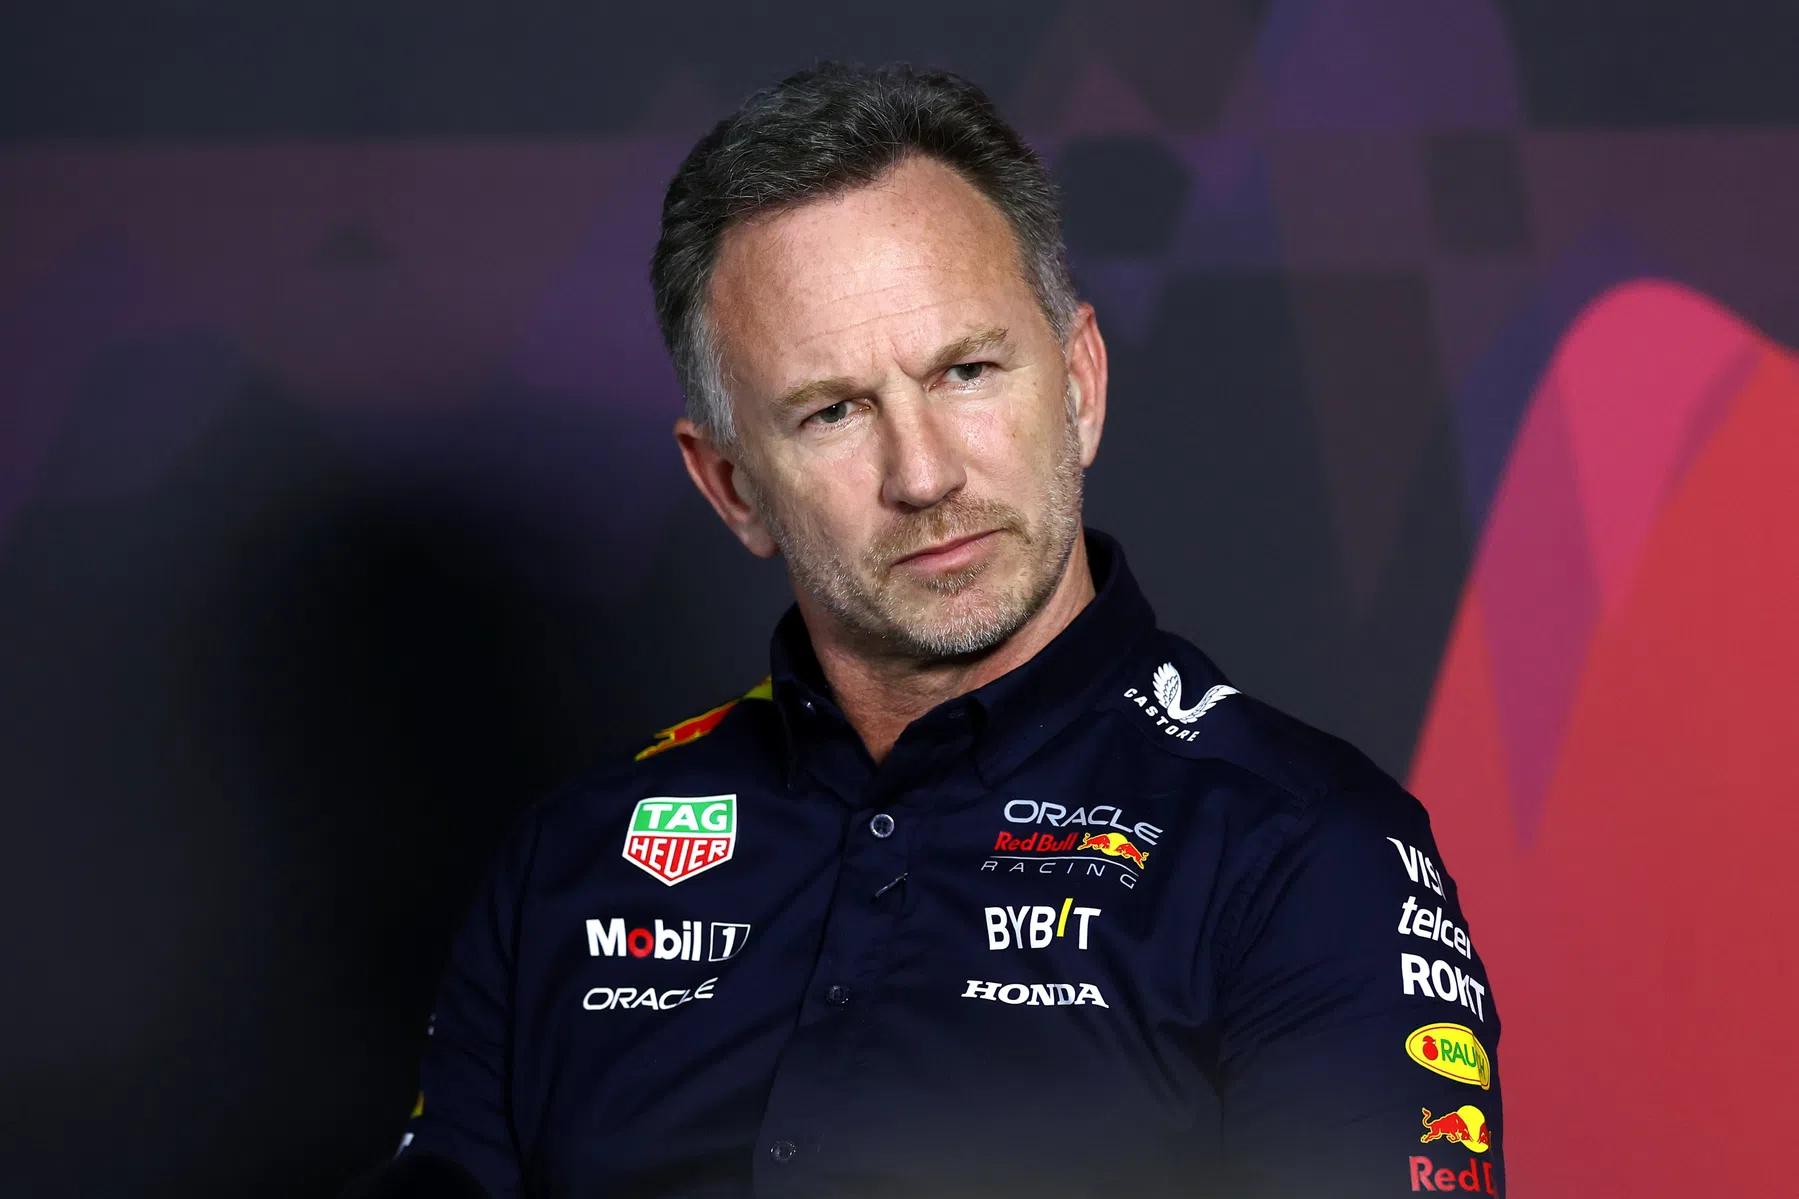 Christian Horner sees increasing competition for Verstappen and Red Bull